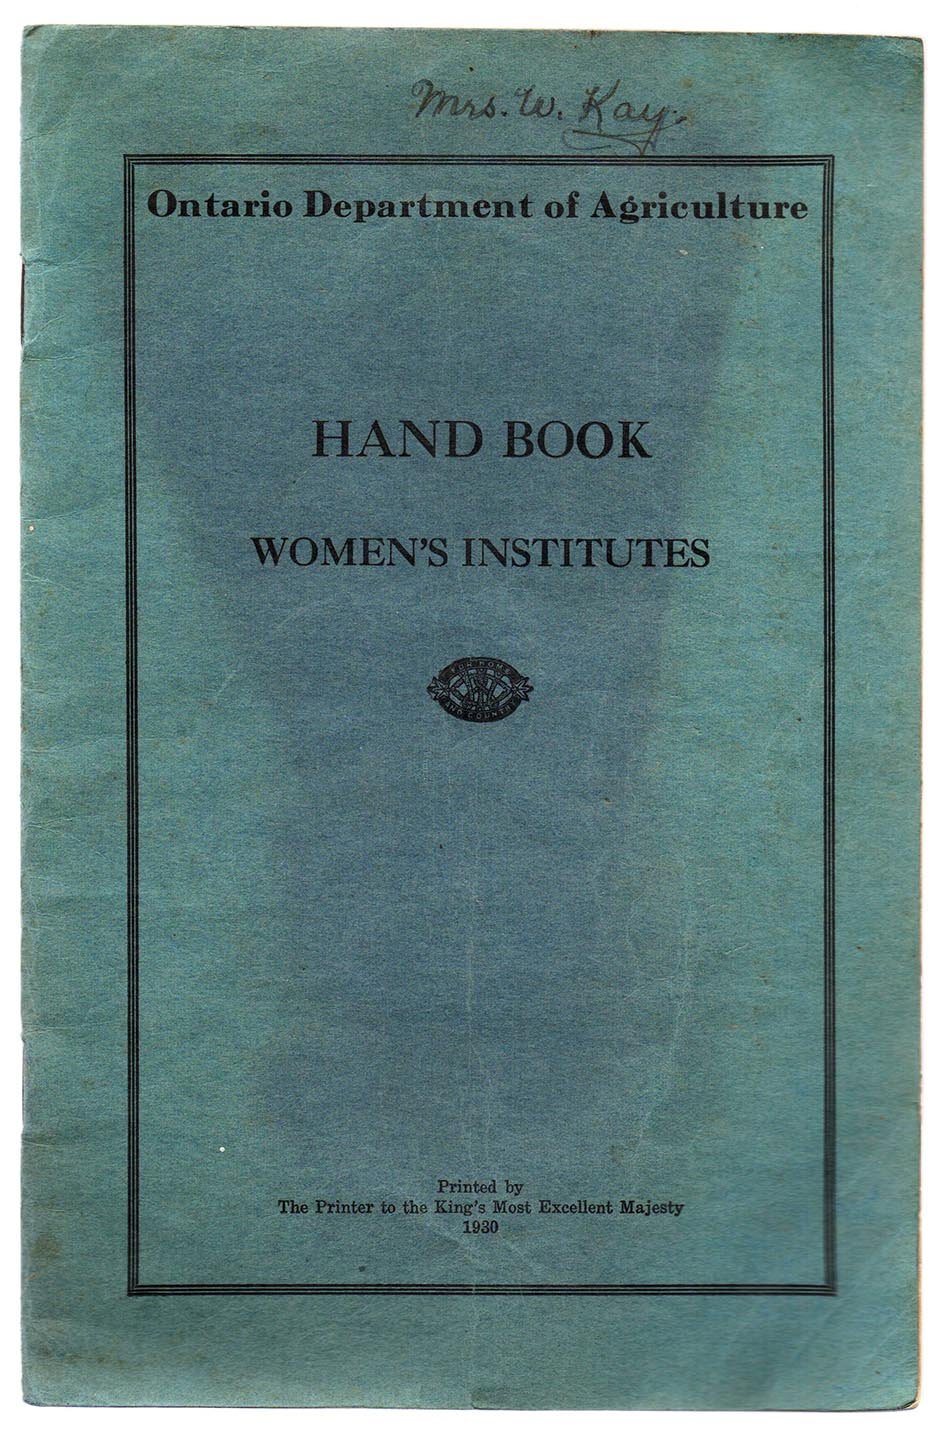 Hand Book For The Use of Women's Institutes in Ontario